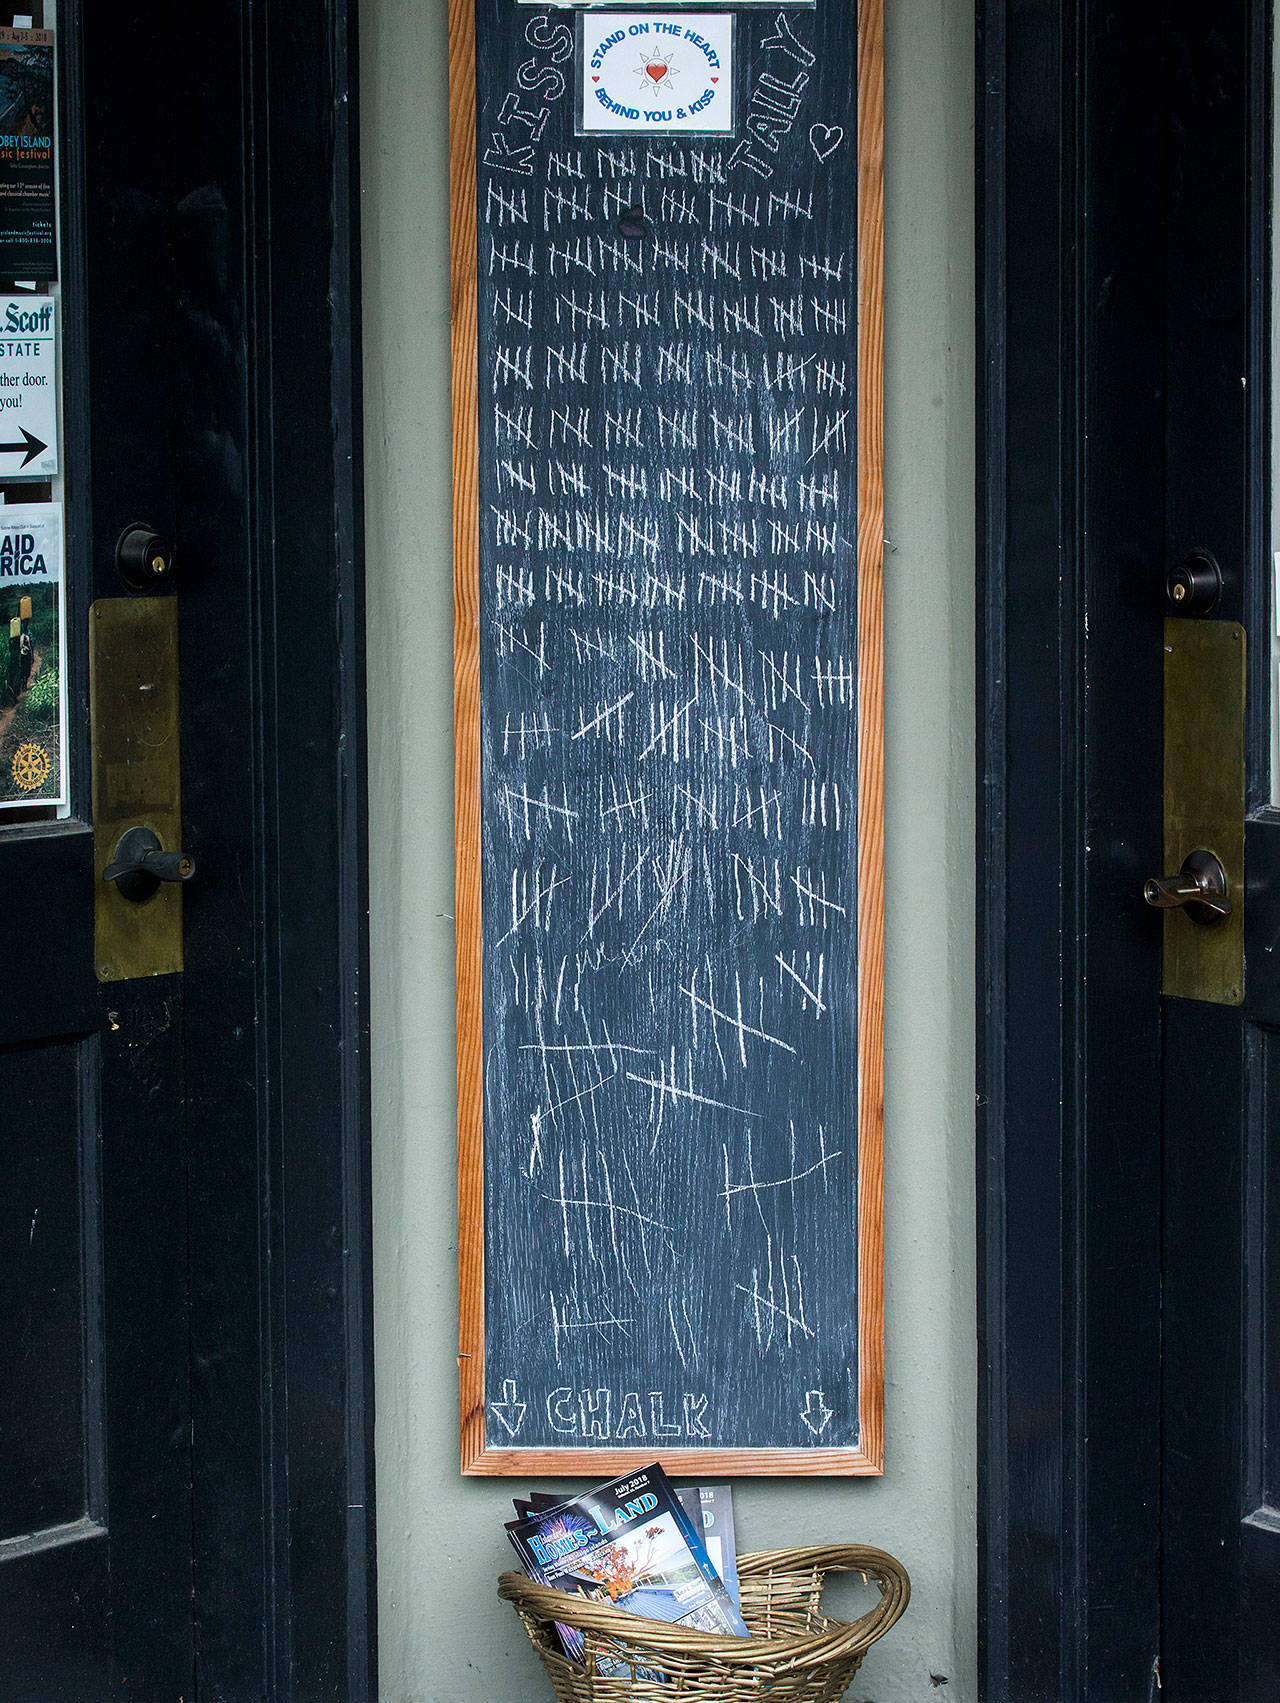 &lt;em&gt;Tally marks on the chalkboard in front of the John L. Scott Real Estate office in Langley get longer and messier the farther down they go.&lt;/em&gt;&lt;em&gt;&lt;/em&gt;